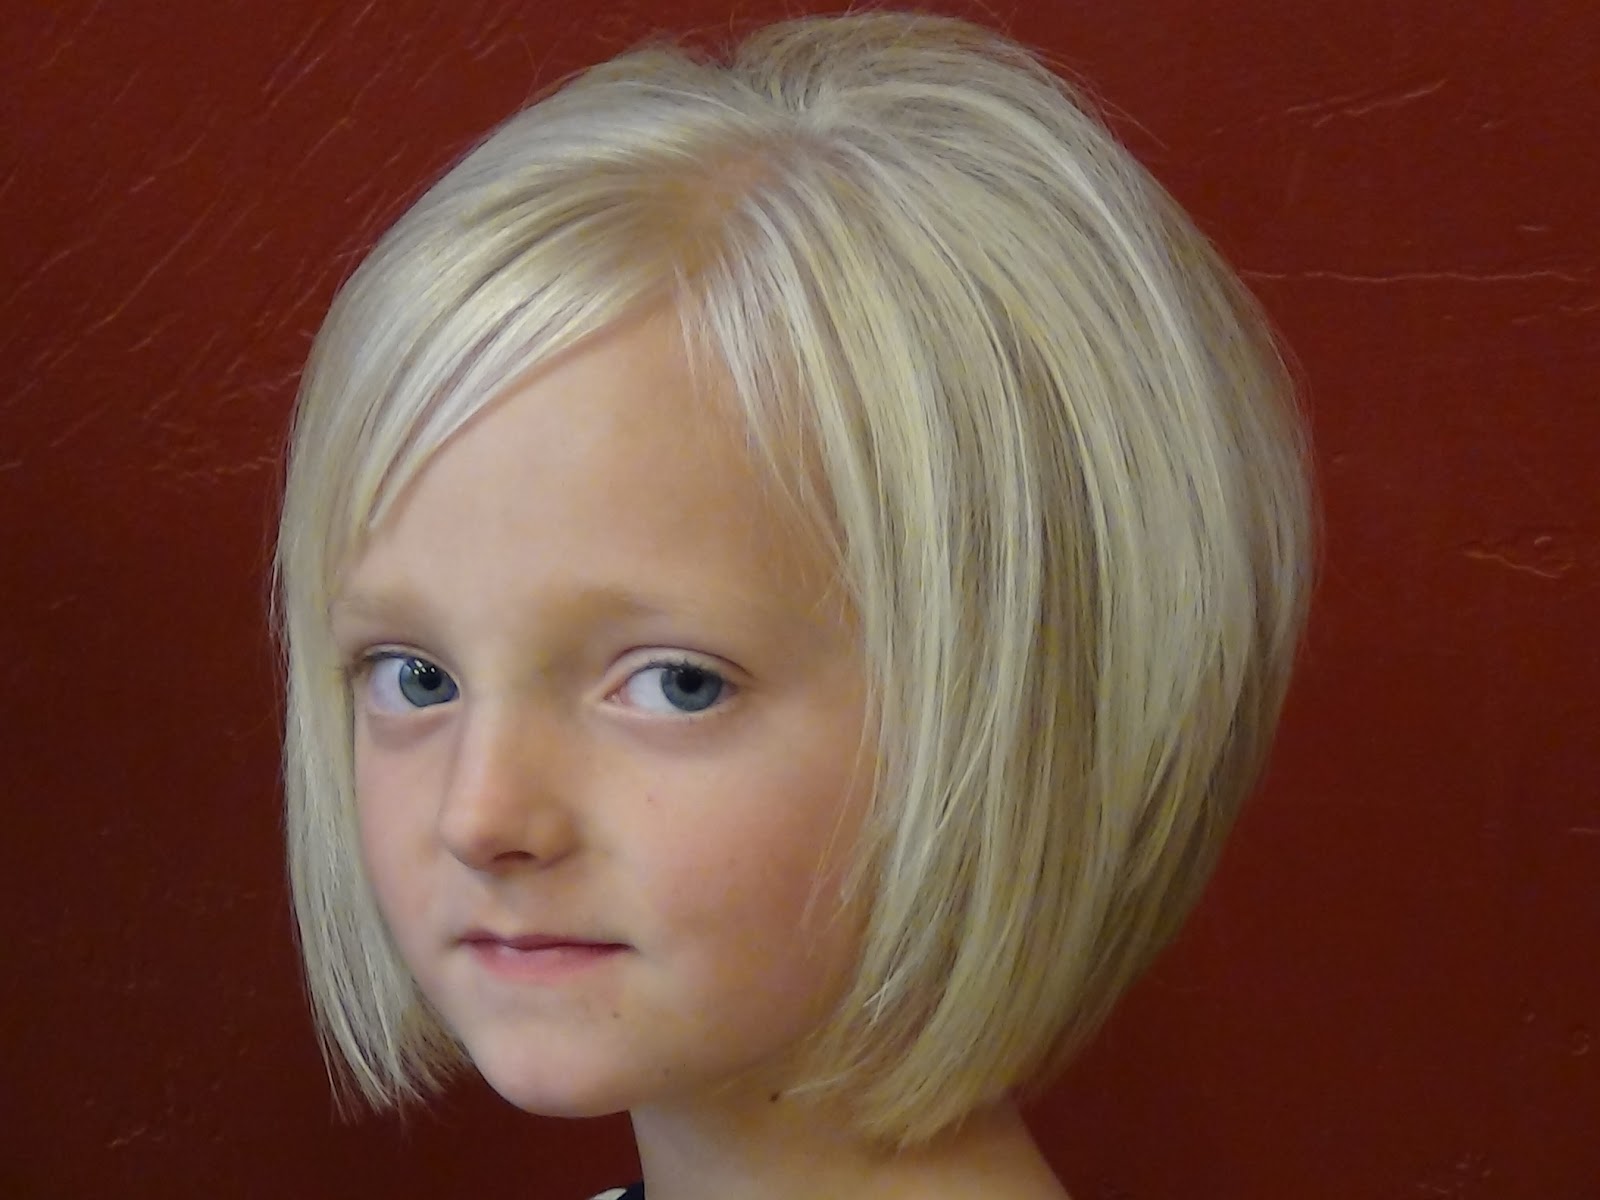 hairstyles for little girls try one of these cute short hairstyles 